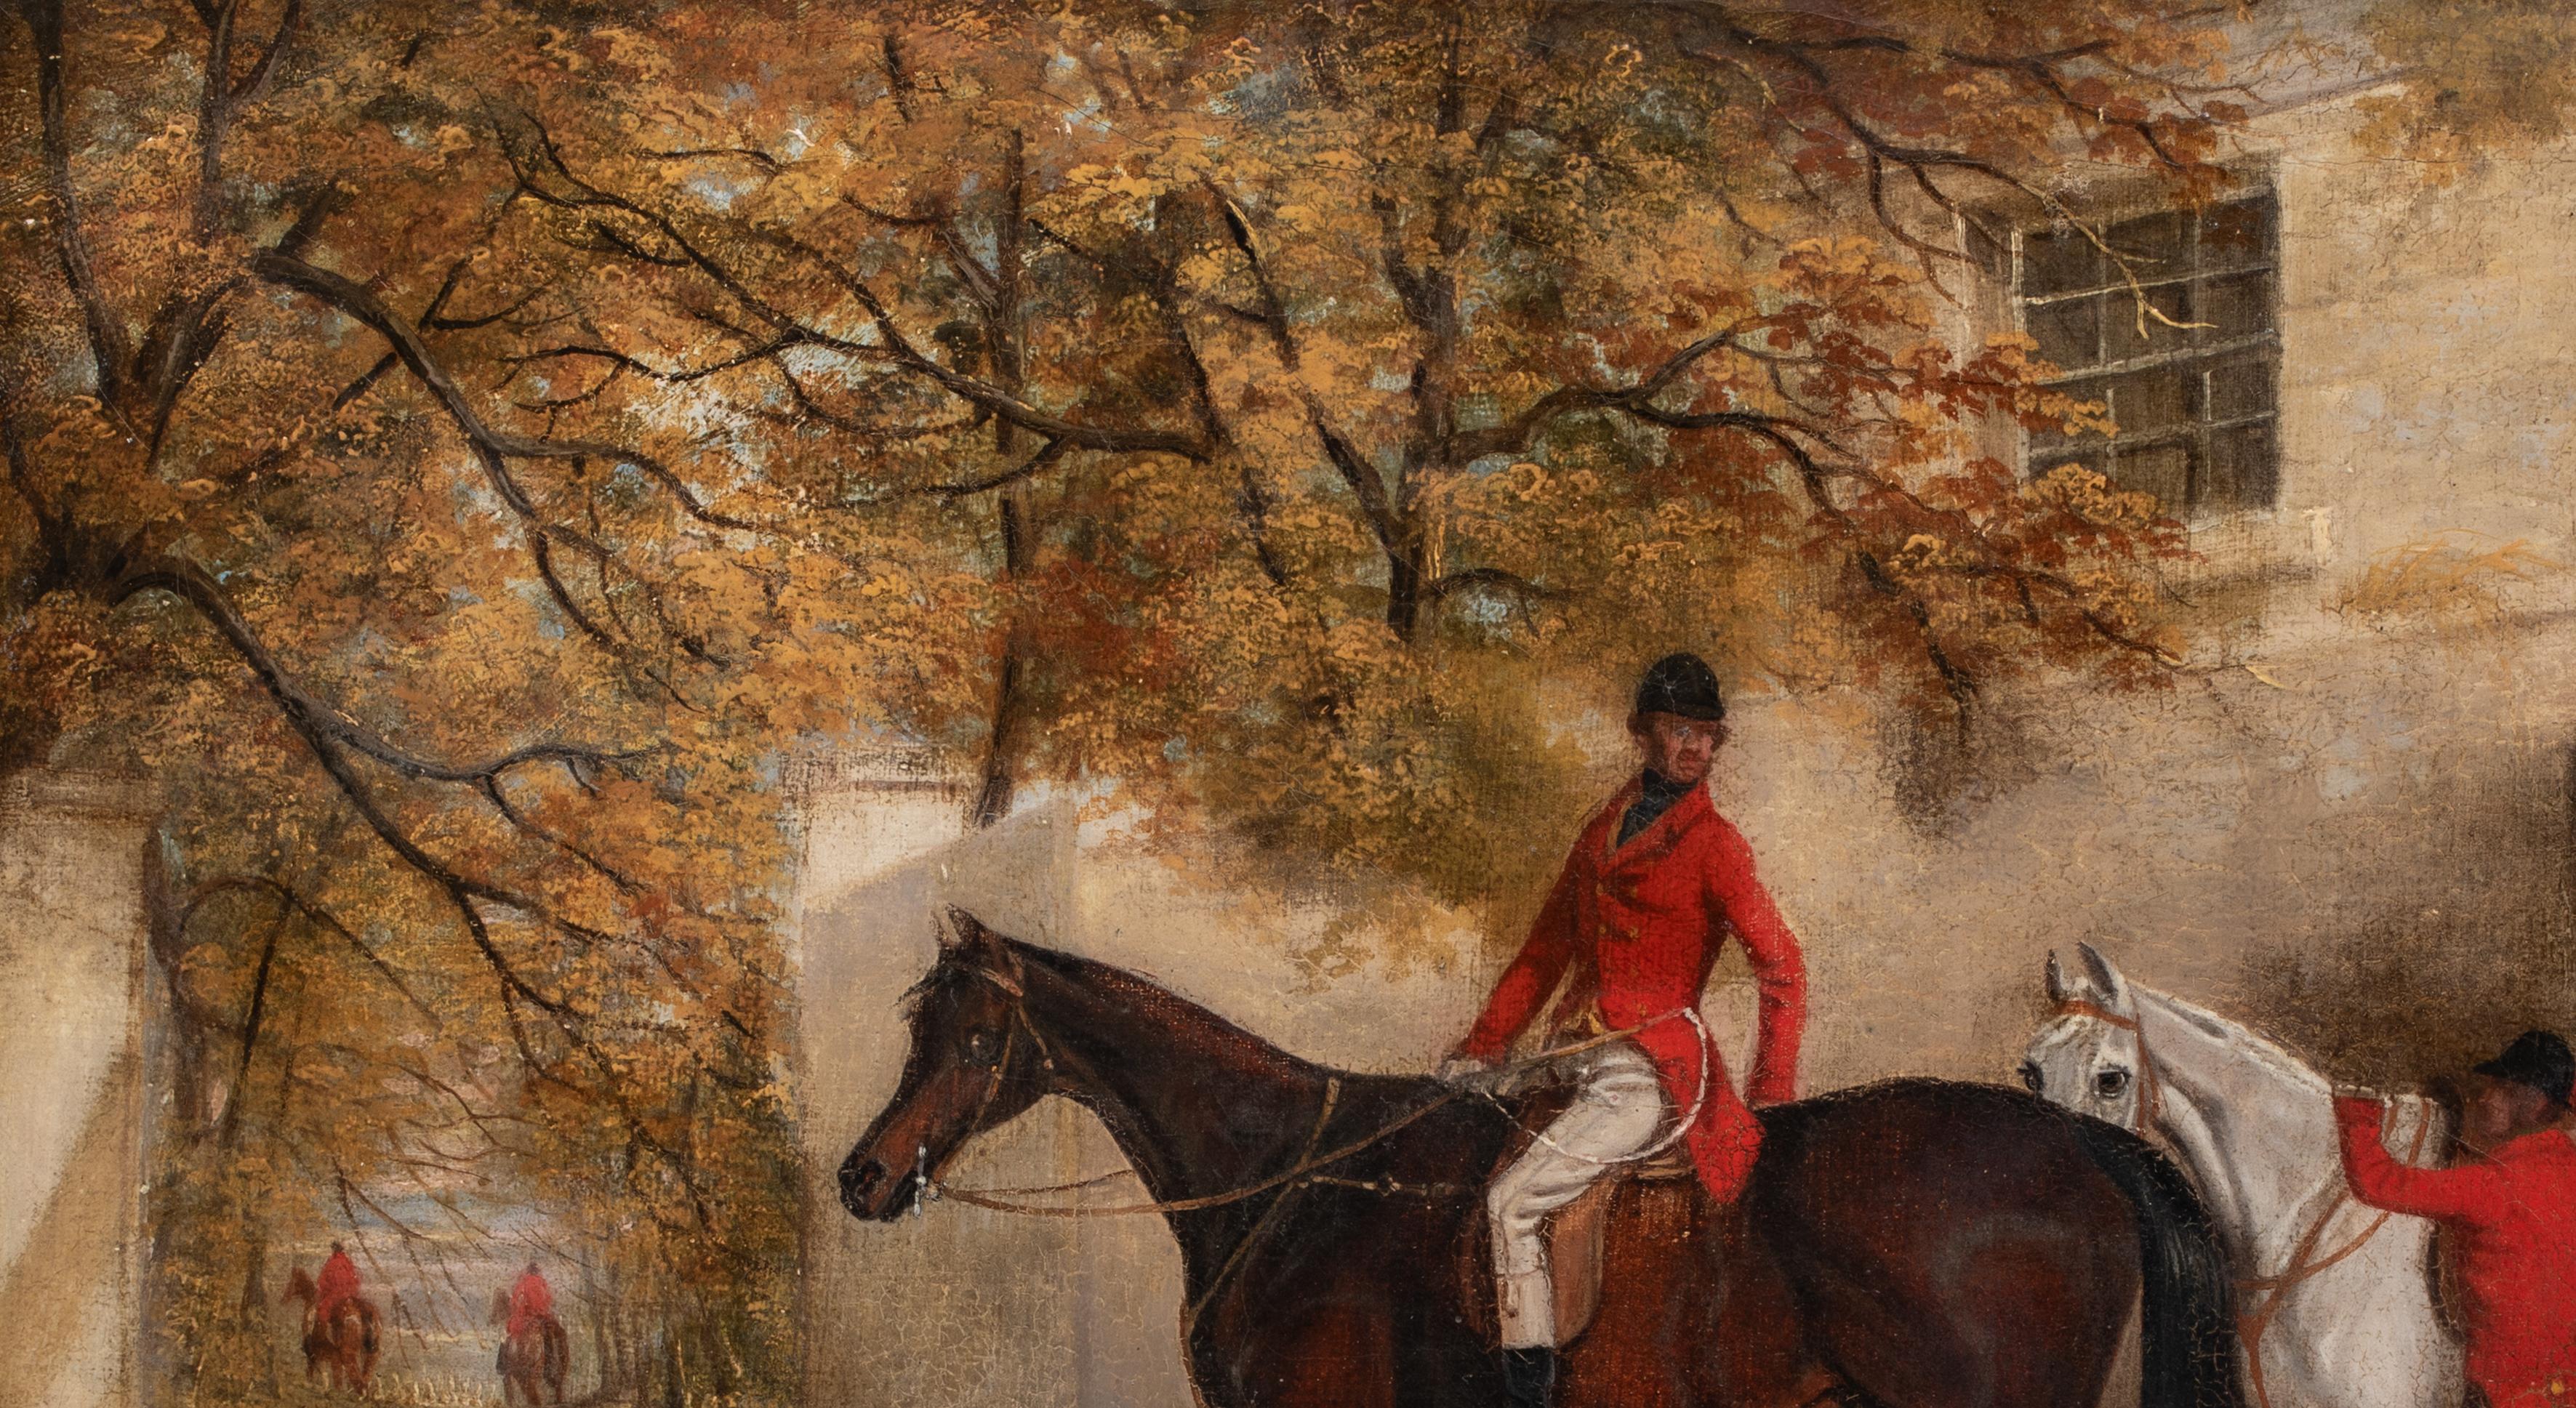 In Hunting Condition, dated 1848

by James Russell RYOTT (1810-1860) similar to $15,000 on of a pair

19th century English Fox Hunting Party scene, oil on canvas by James Russell Ryott. Excellent quality and condition example of the famous sporting